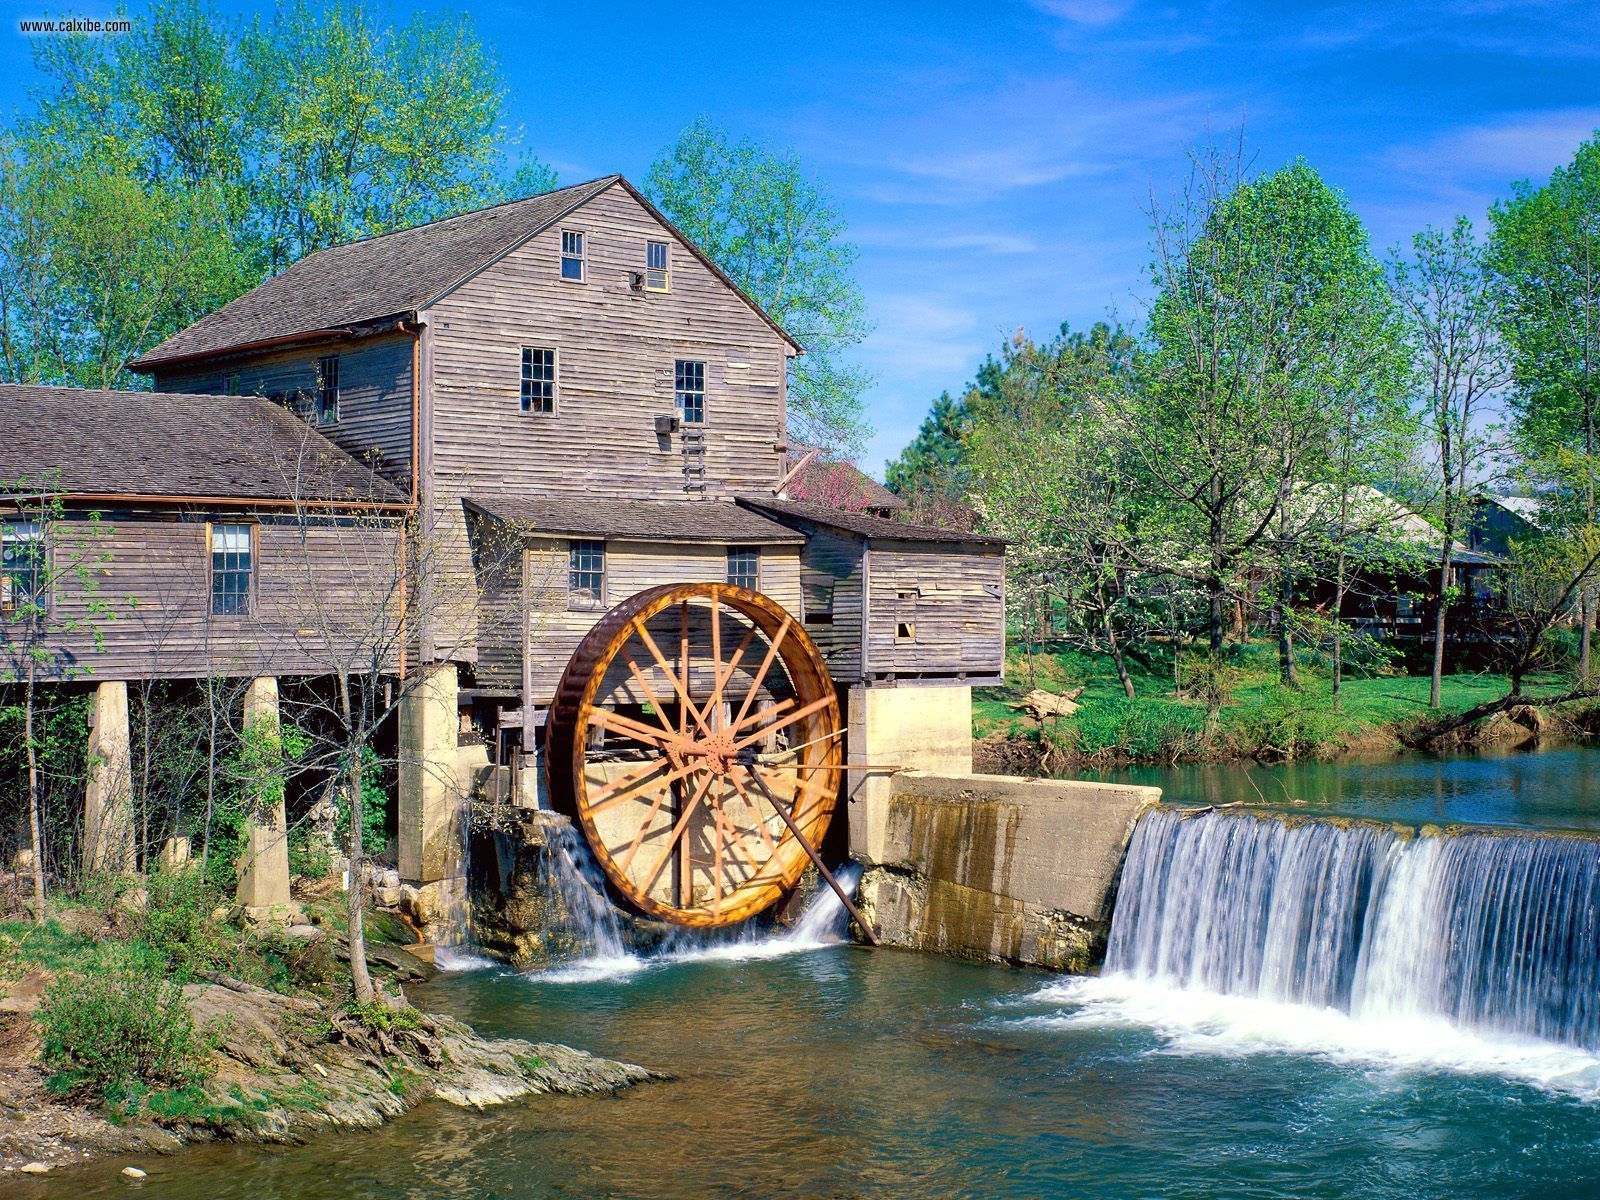 The Old Mill Restaurant in Pigeon Forge, TN...We eat here every time ...